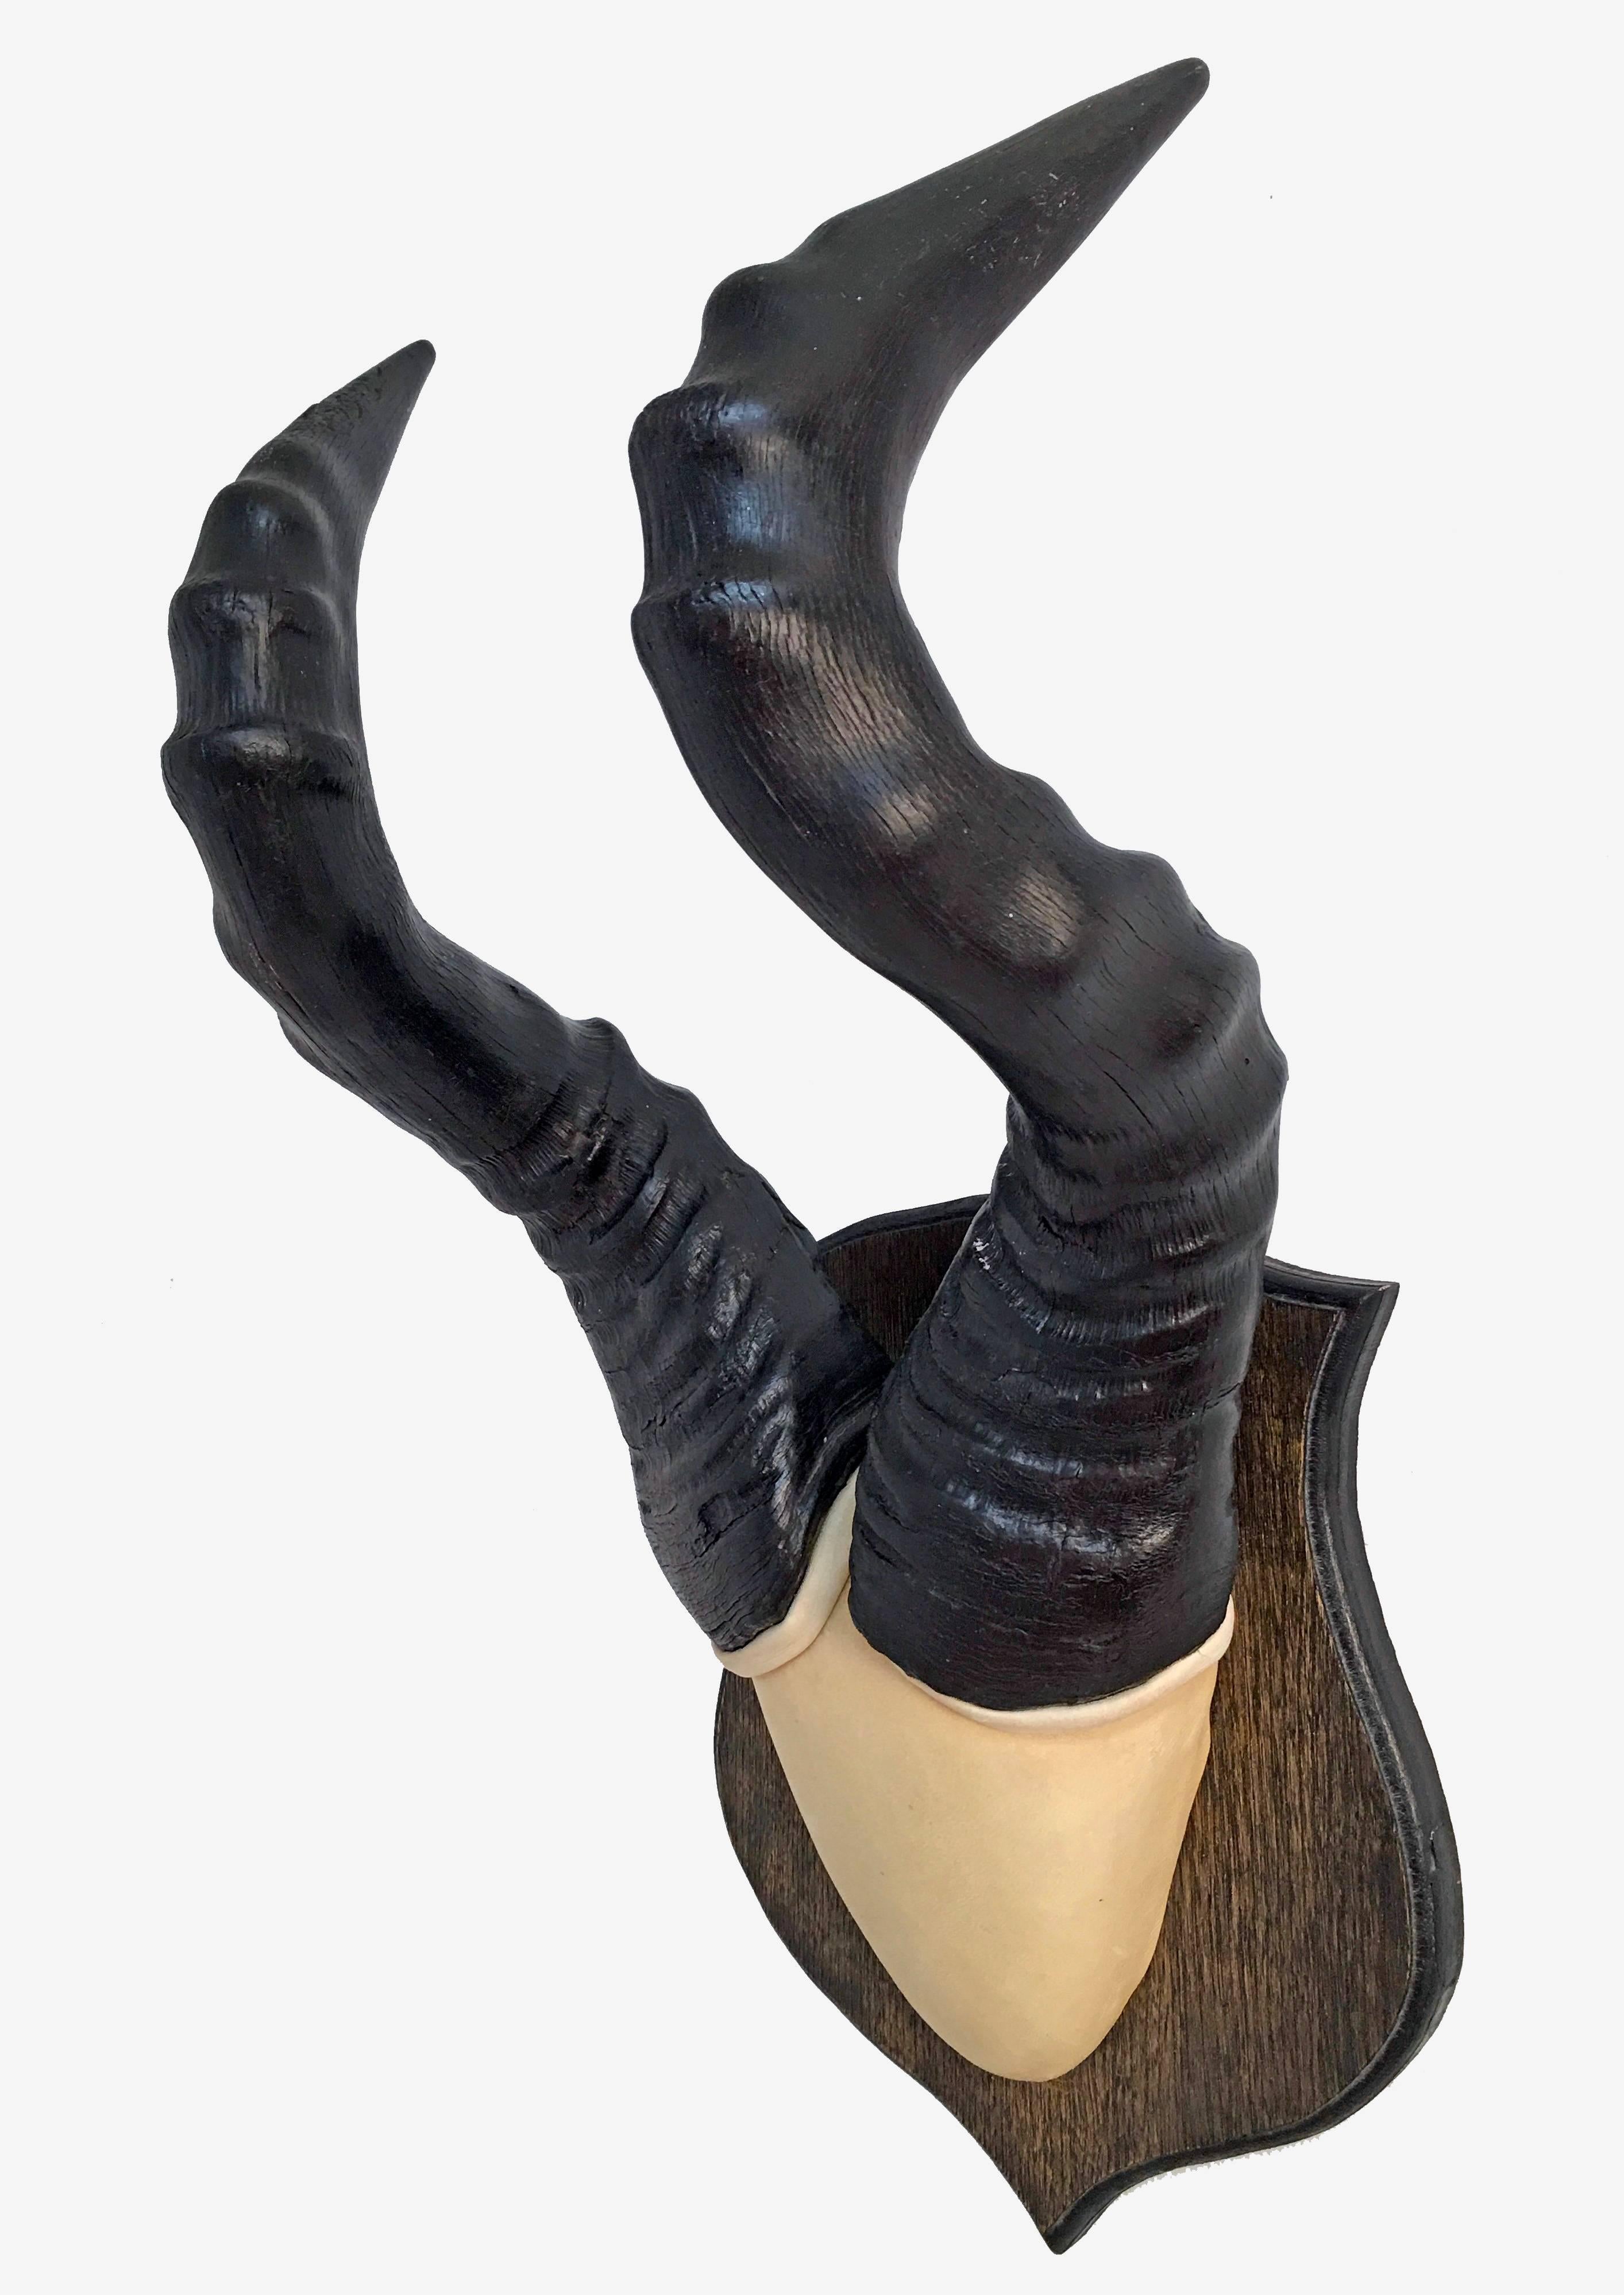 Set of Jackson's Hartebeest Horns professionally conserved and unusually mounted on kid suede covered form and attached to heraldic shaped wood plaque. African, 20th century.

These came from the Bechtel Estate in Atherton, CA.